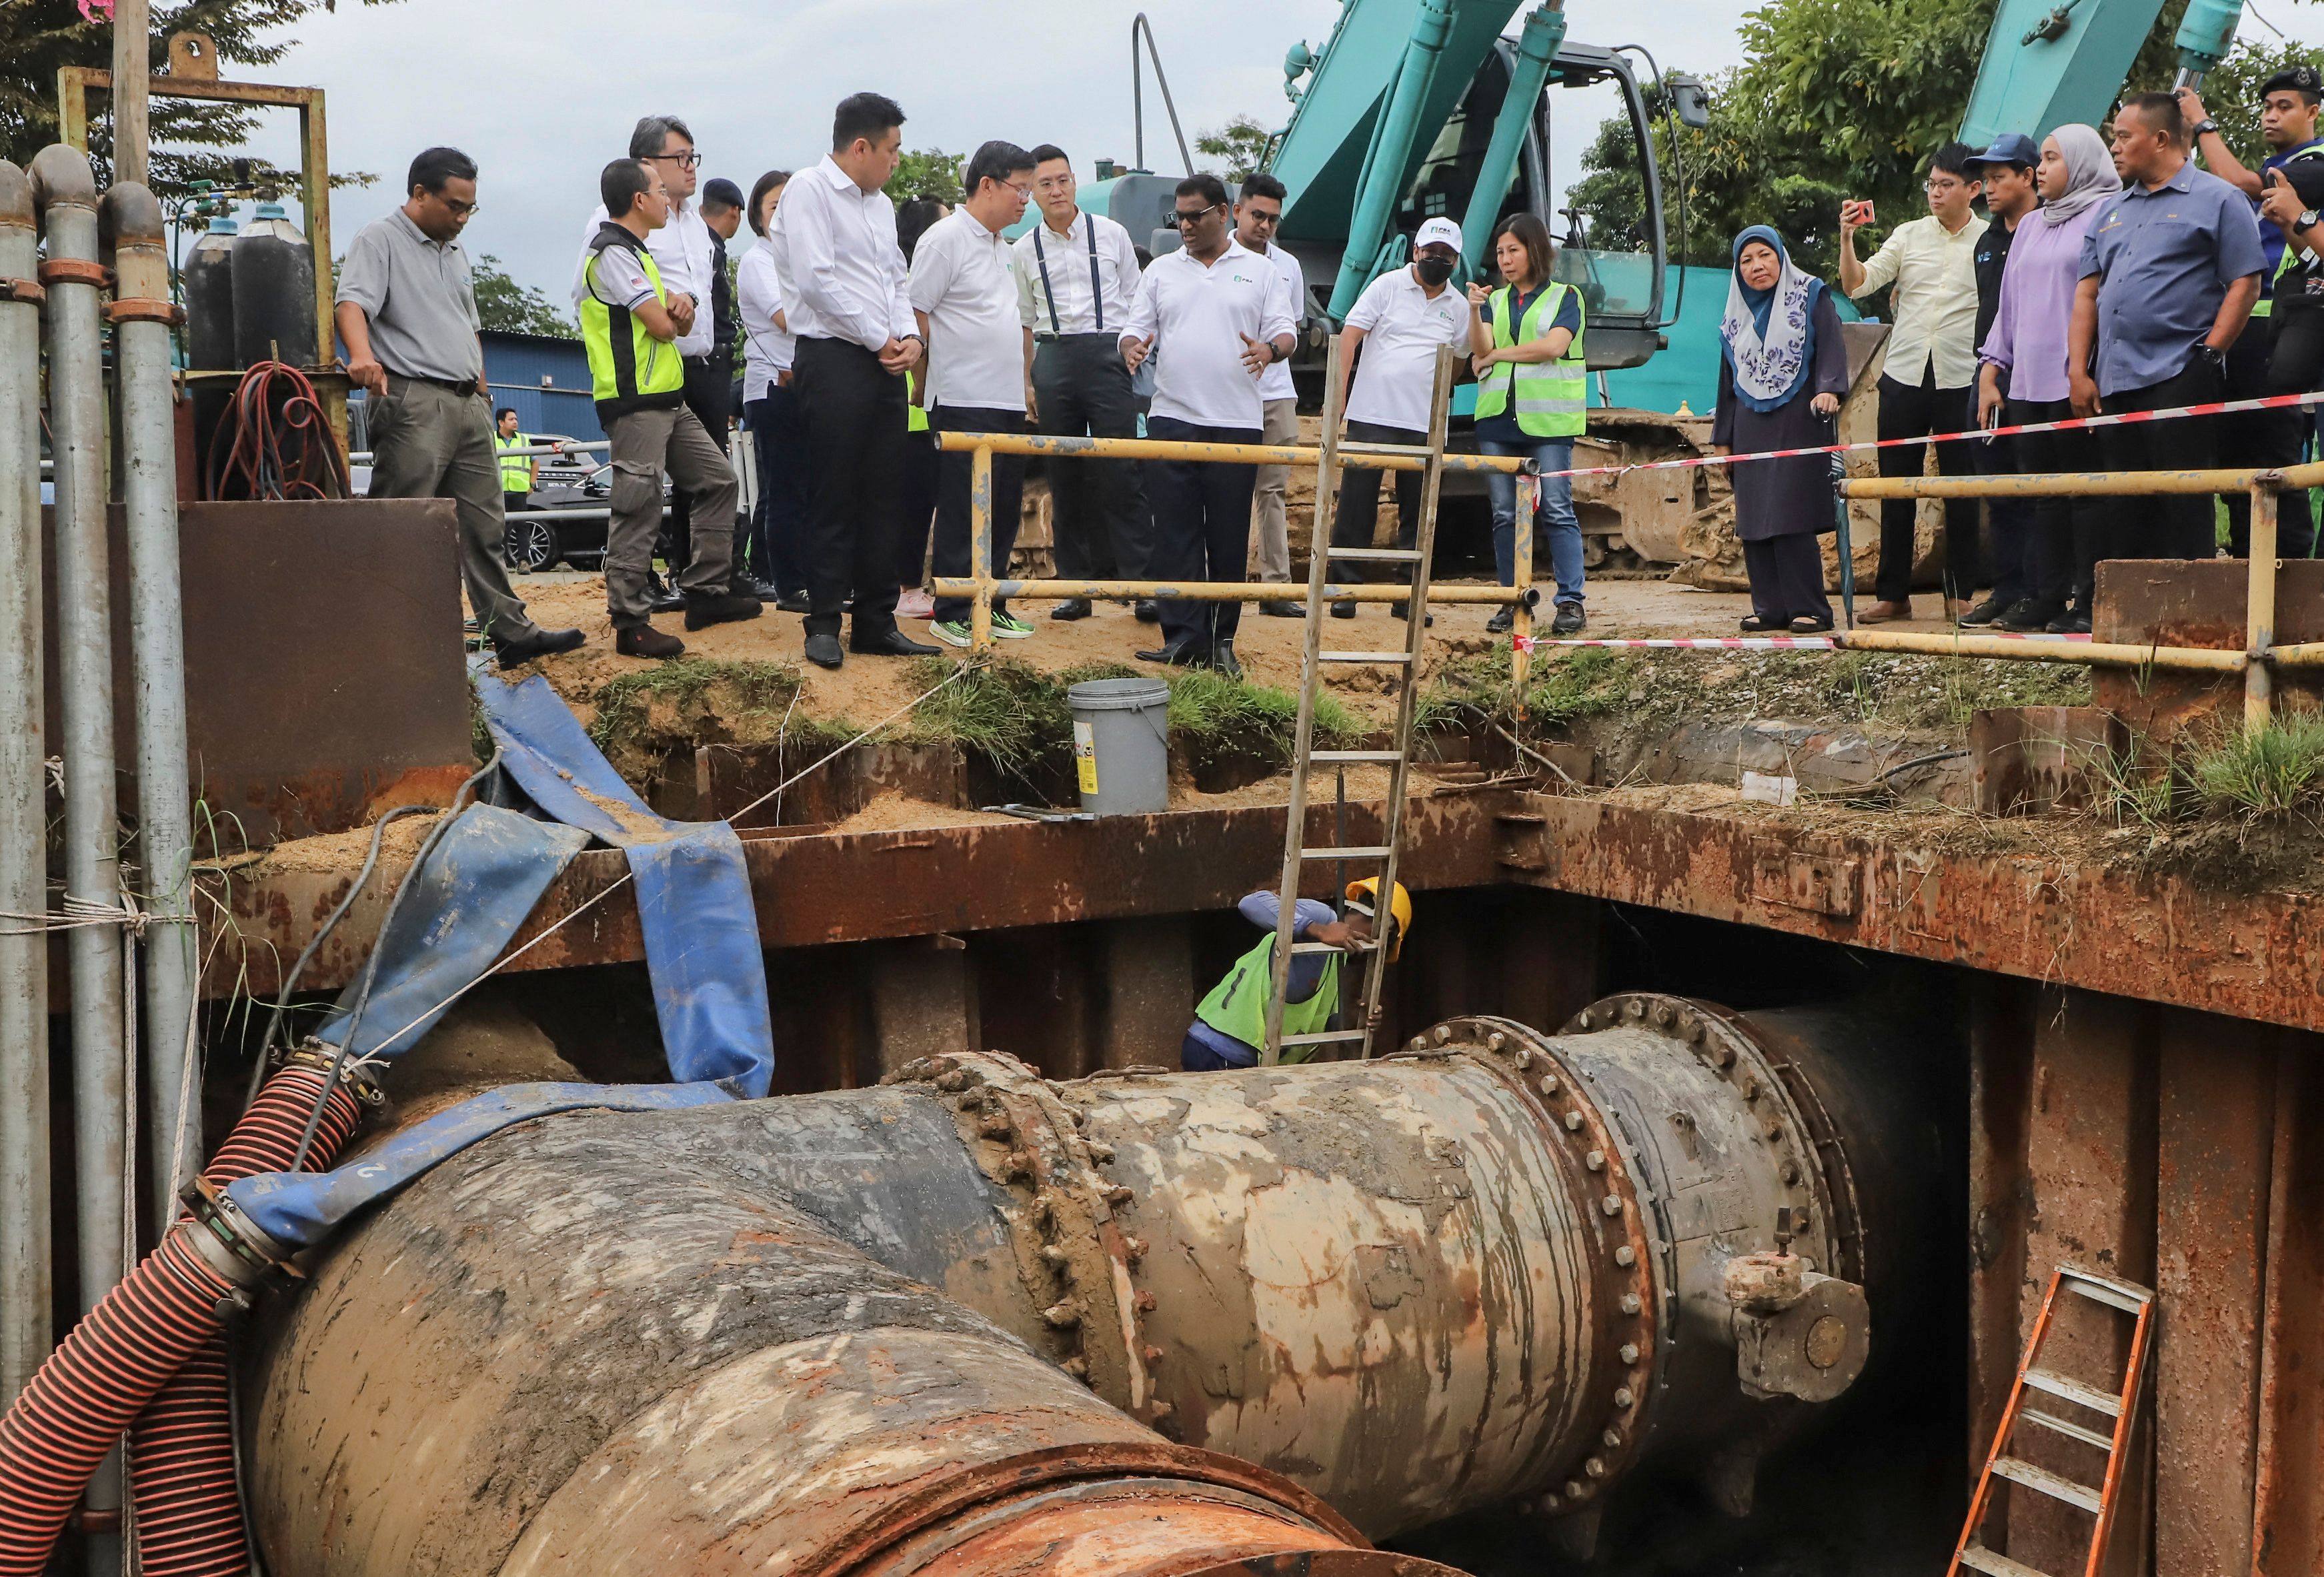 Workers replace water valves at the Sungai Dua water treatment plant as Penang’s Chief Minister Chow Kon Yeow inspects their progress in Penang on January 10. Photo: AFP